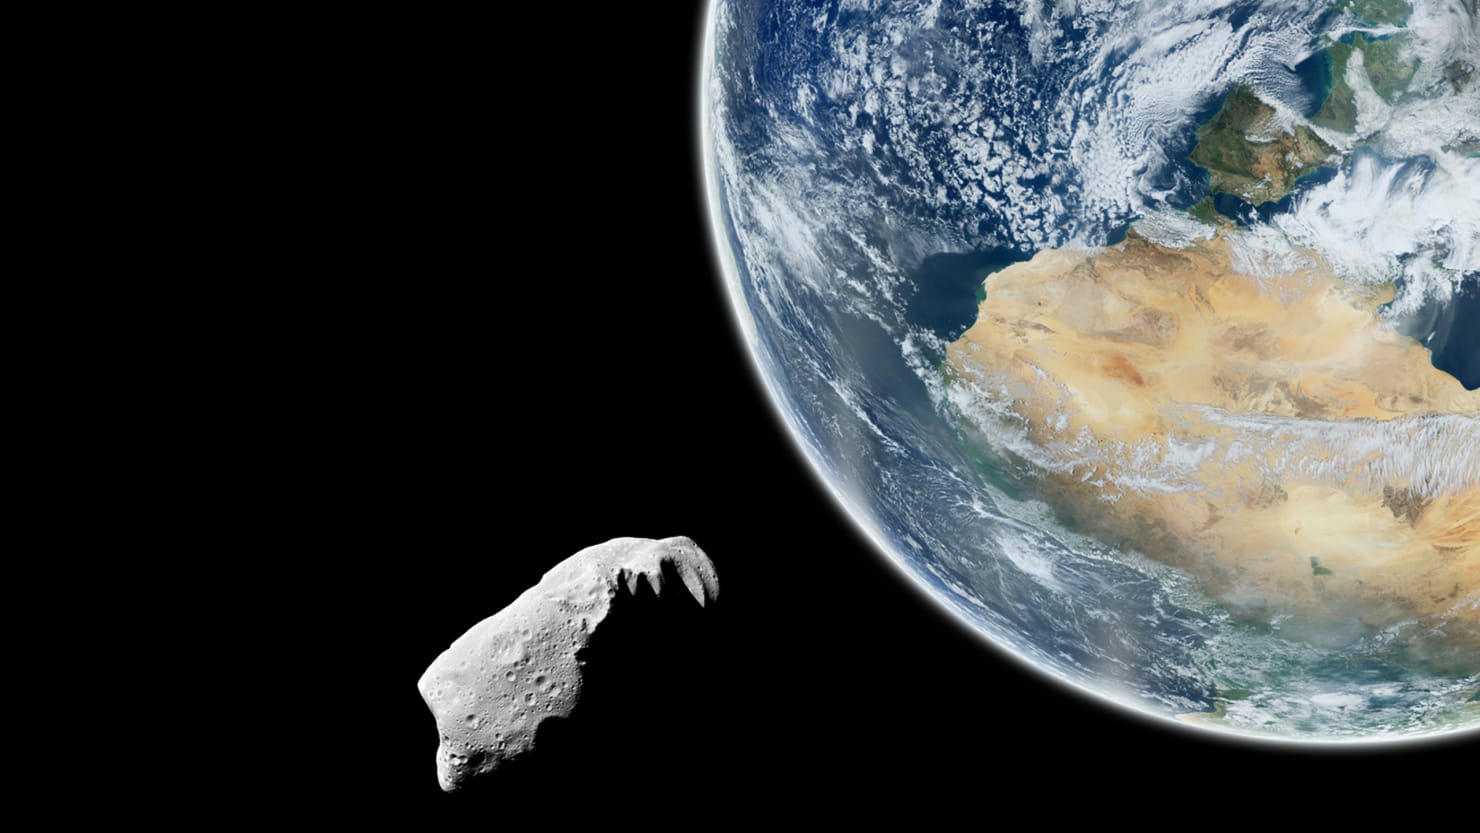 City Block-Sized Asteroid Comes Scarily Close to Earth1480 x 833